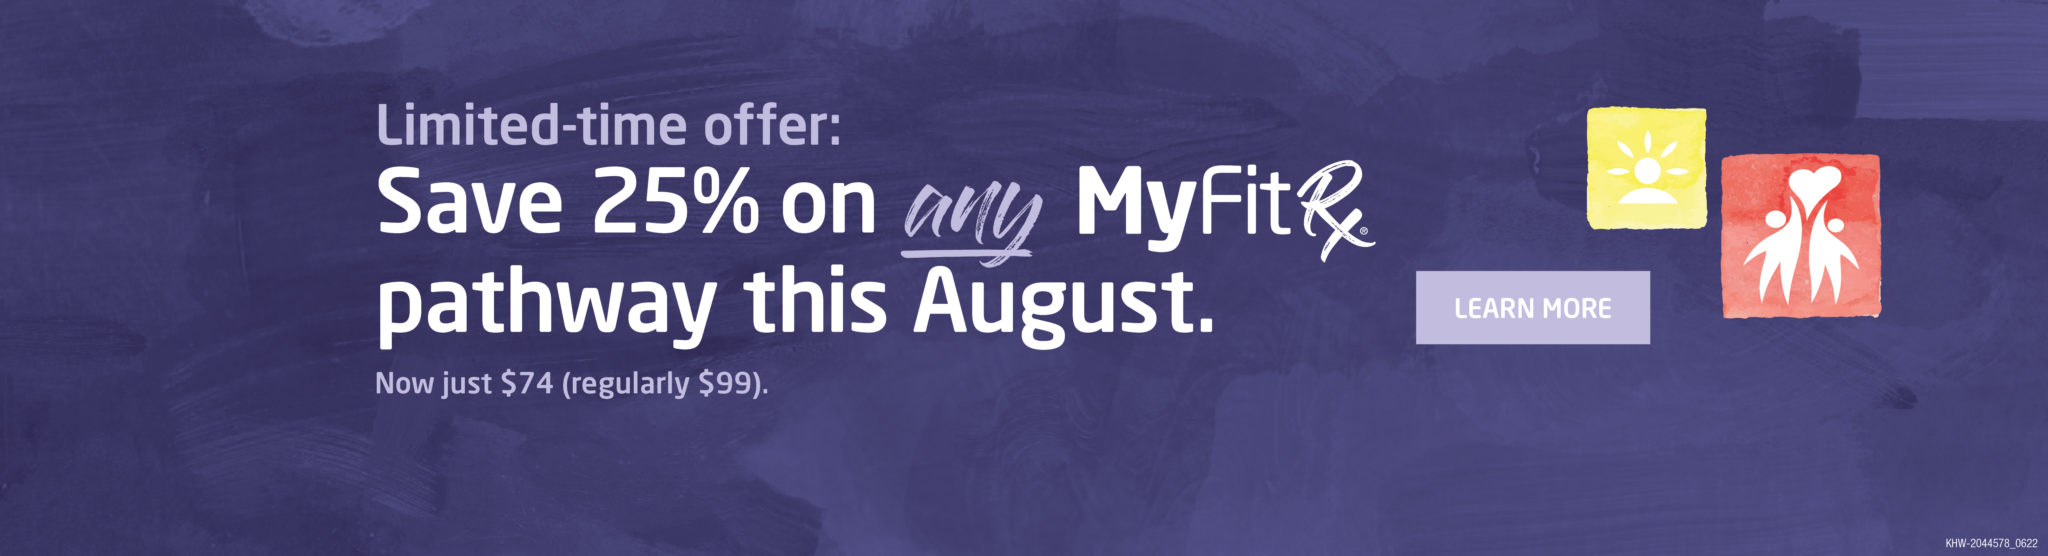 Save 25% on any pathway this August.